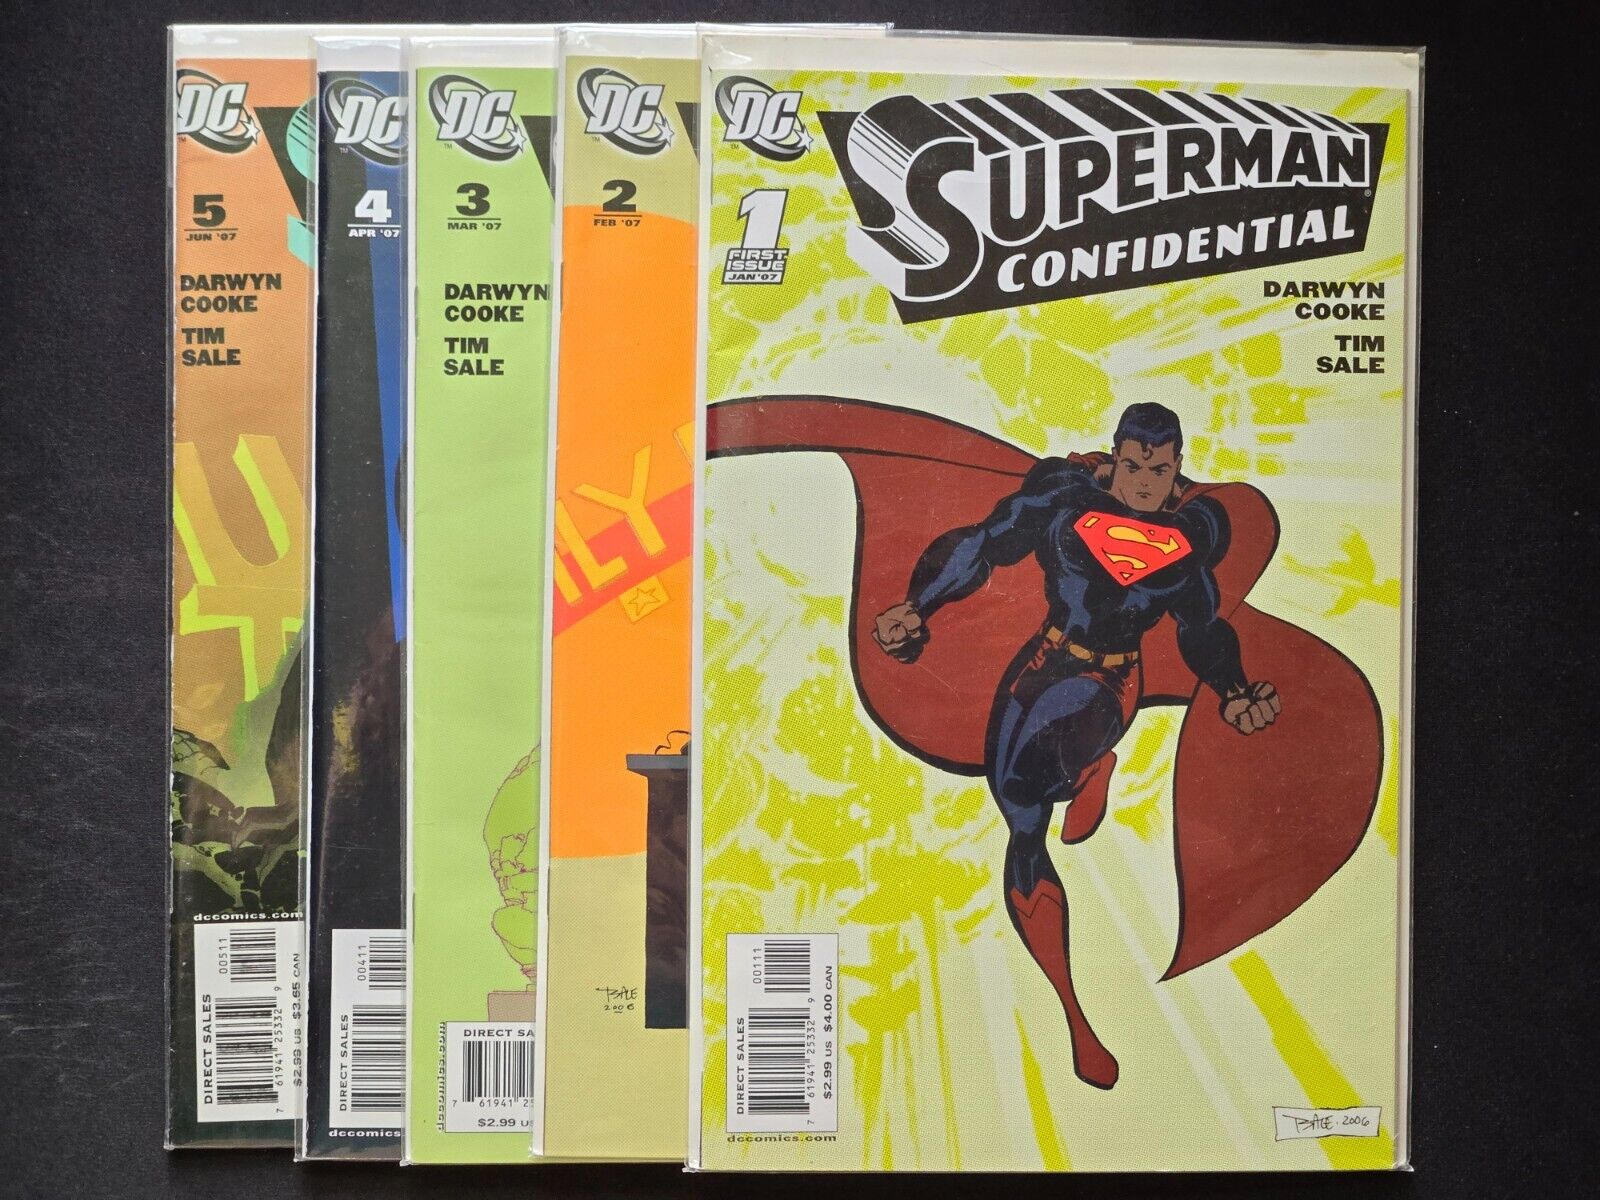 (LOT 5) Superman Confidential # 1 2 3 4 5 DC Comics 2007 Boarded Bagged